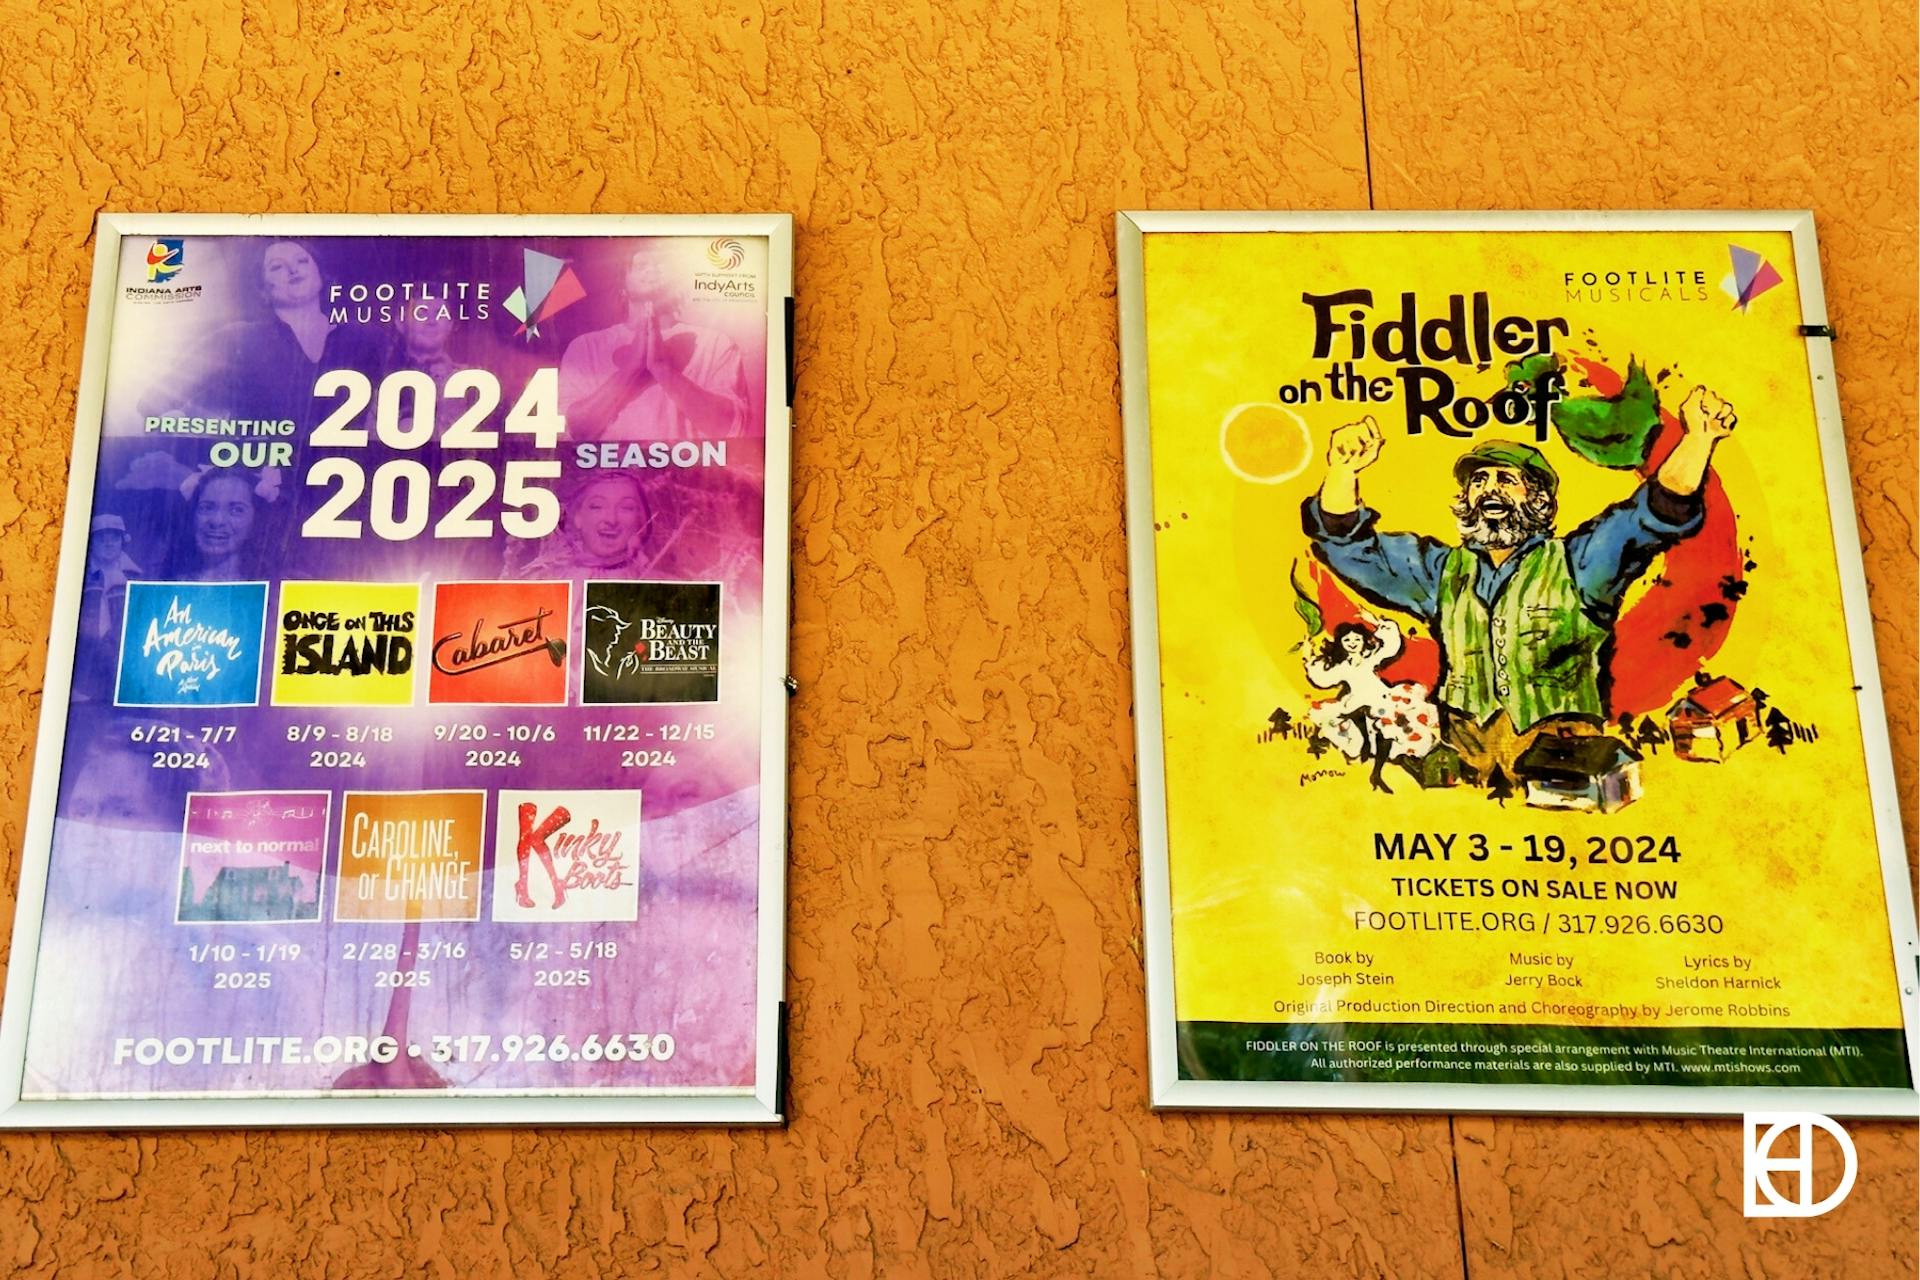 Photo of posters outside Footlite Musicals